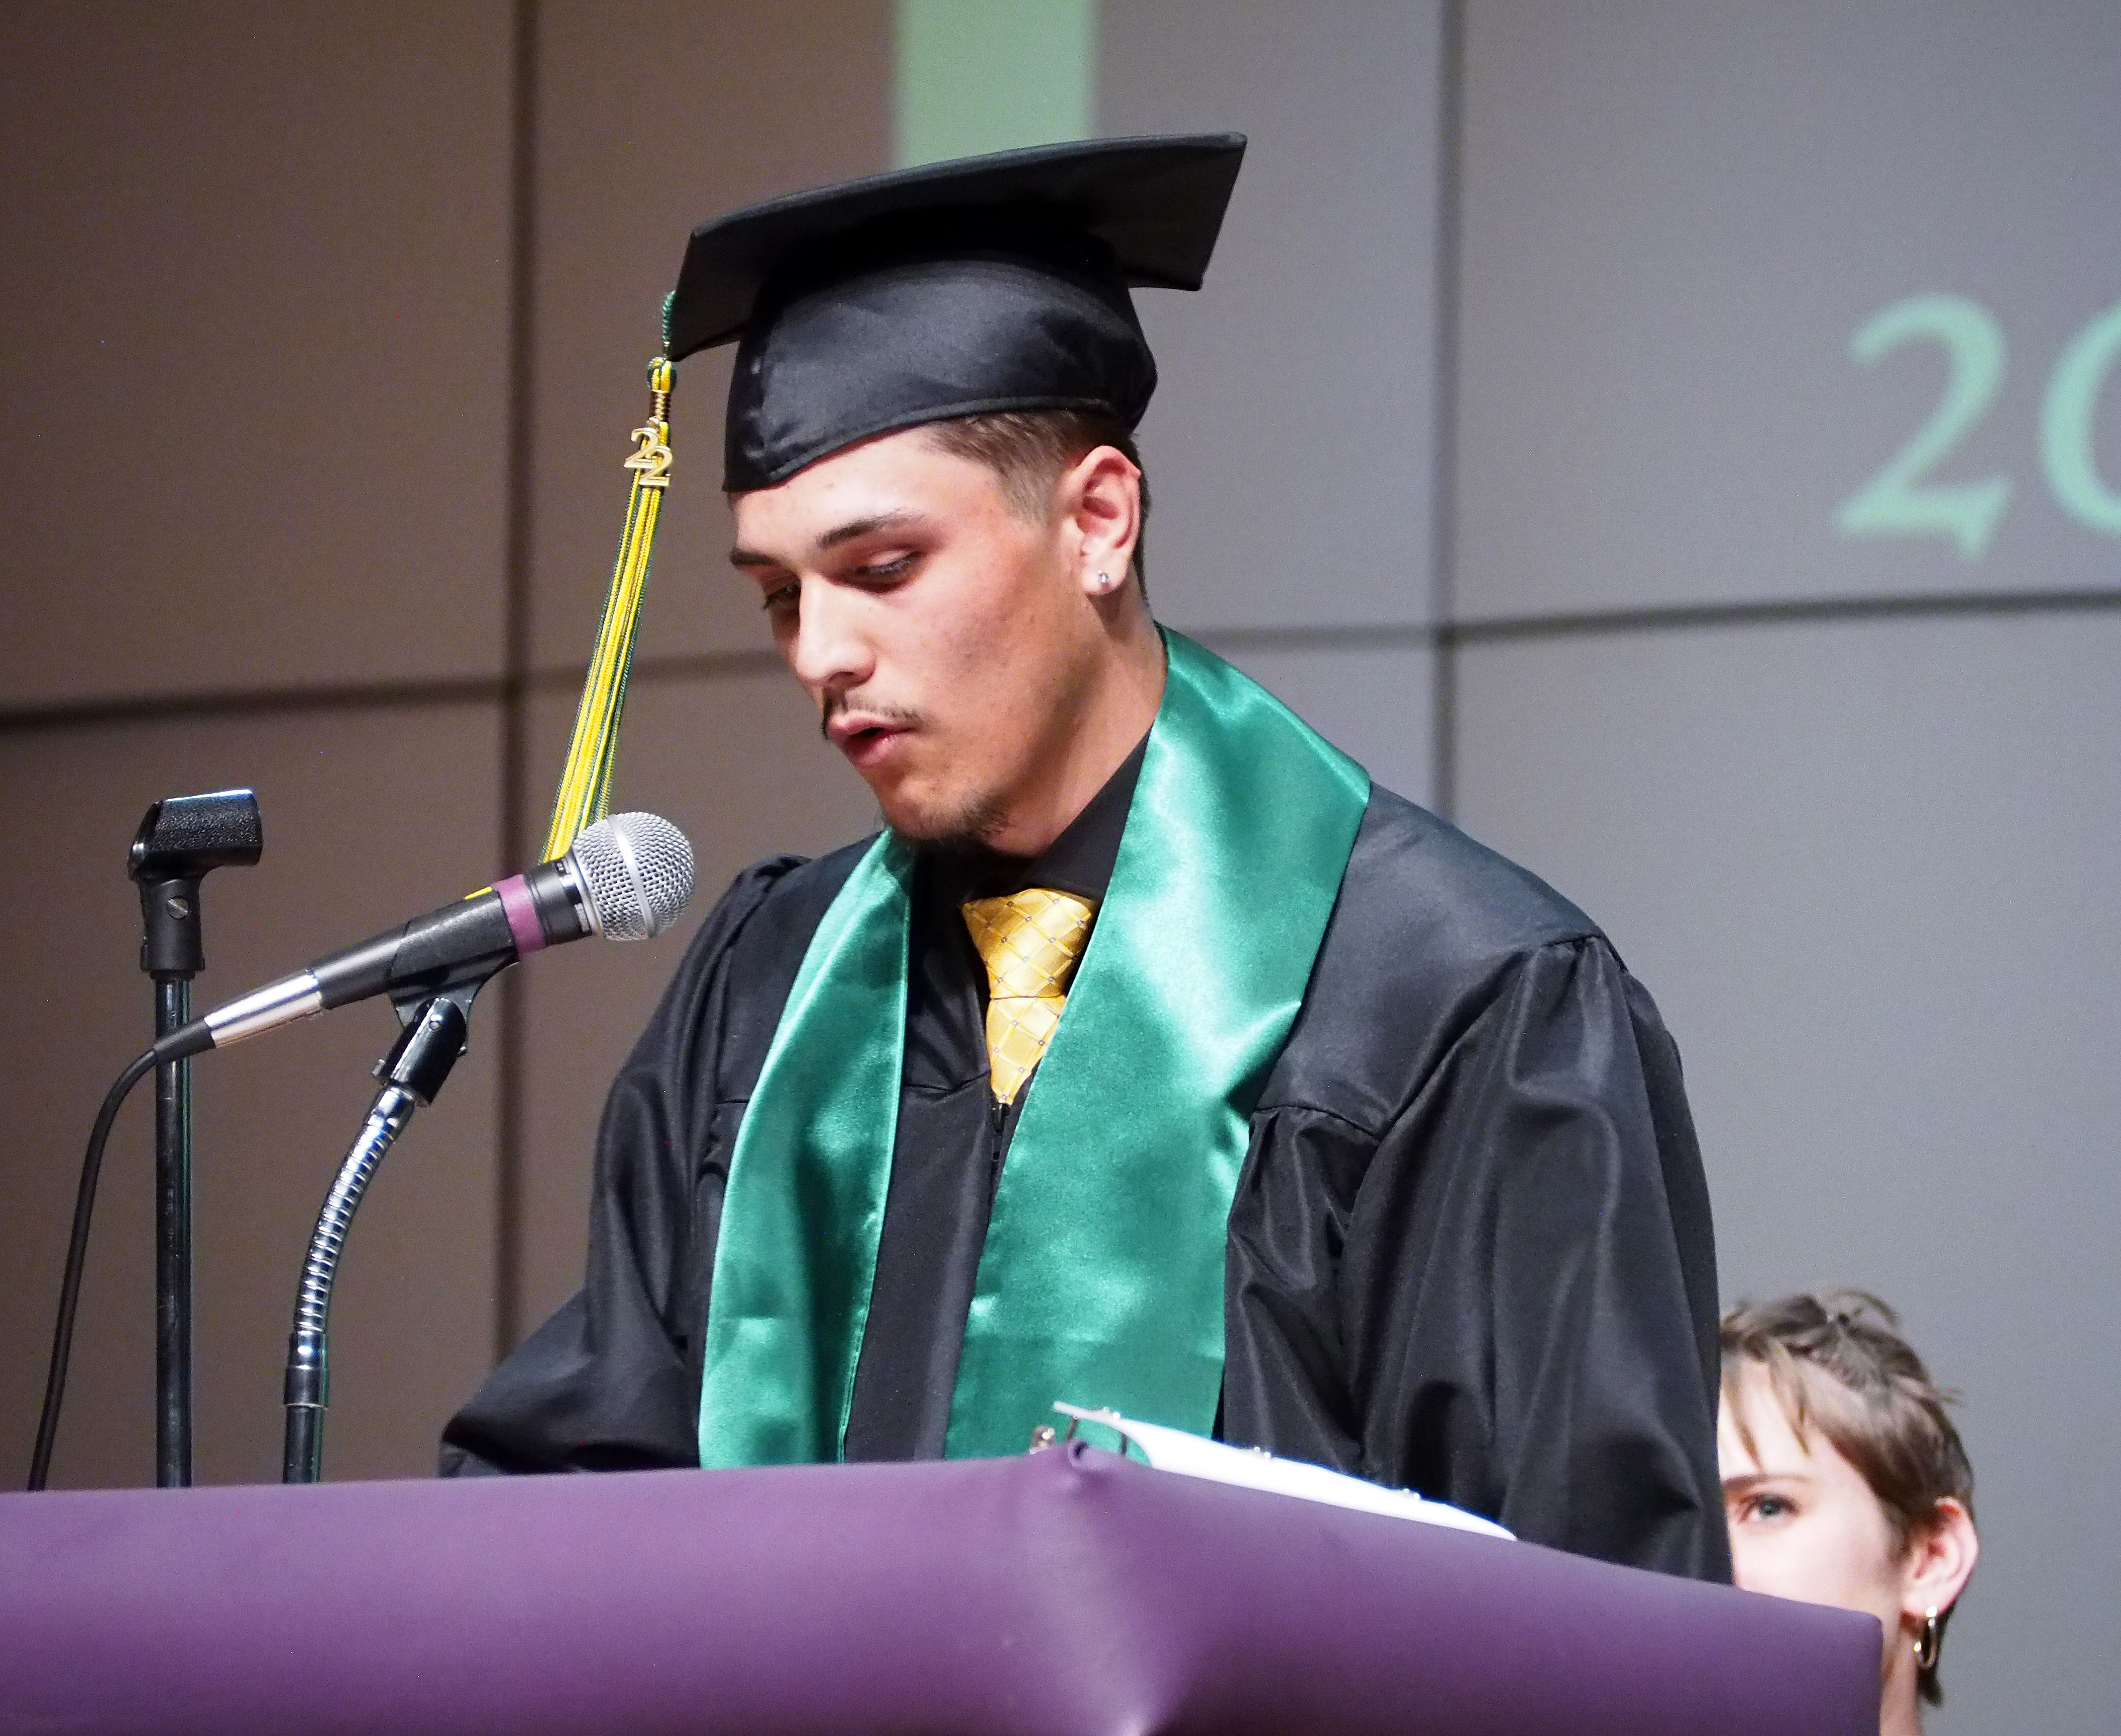 A male graduate with a sash speaks at the podium